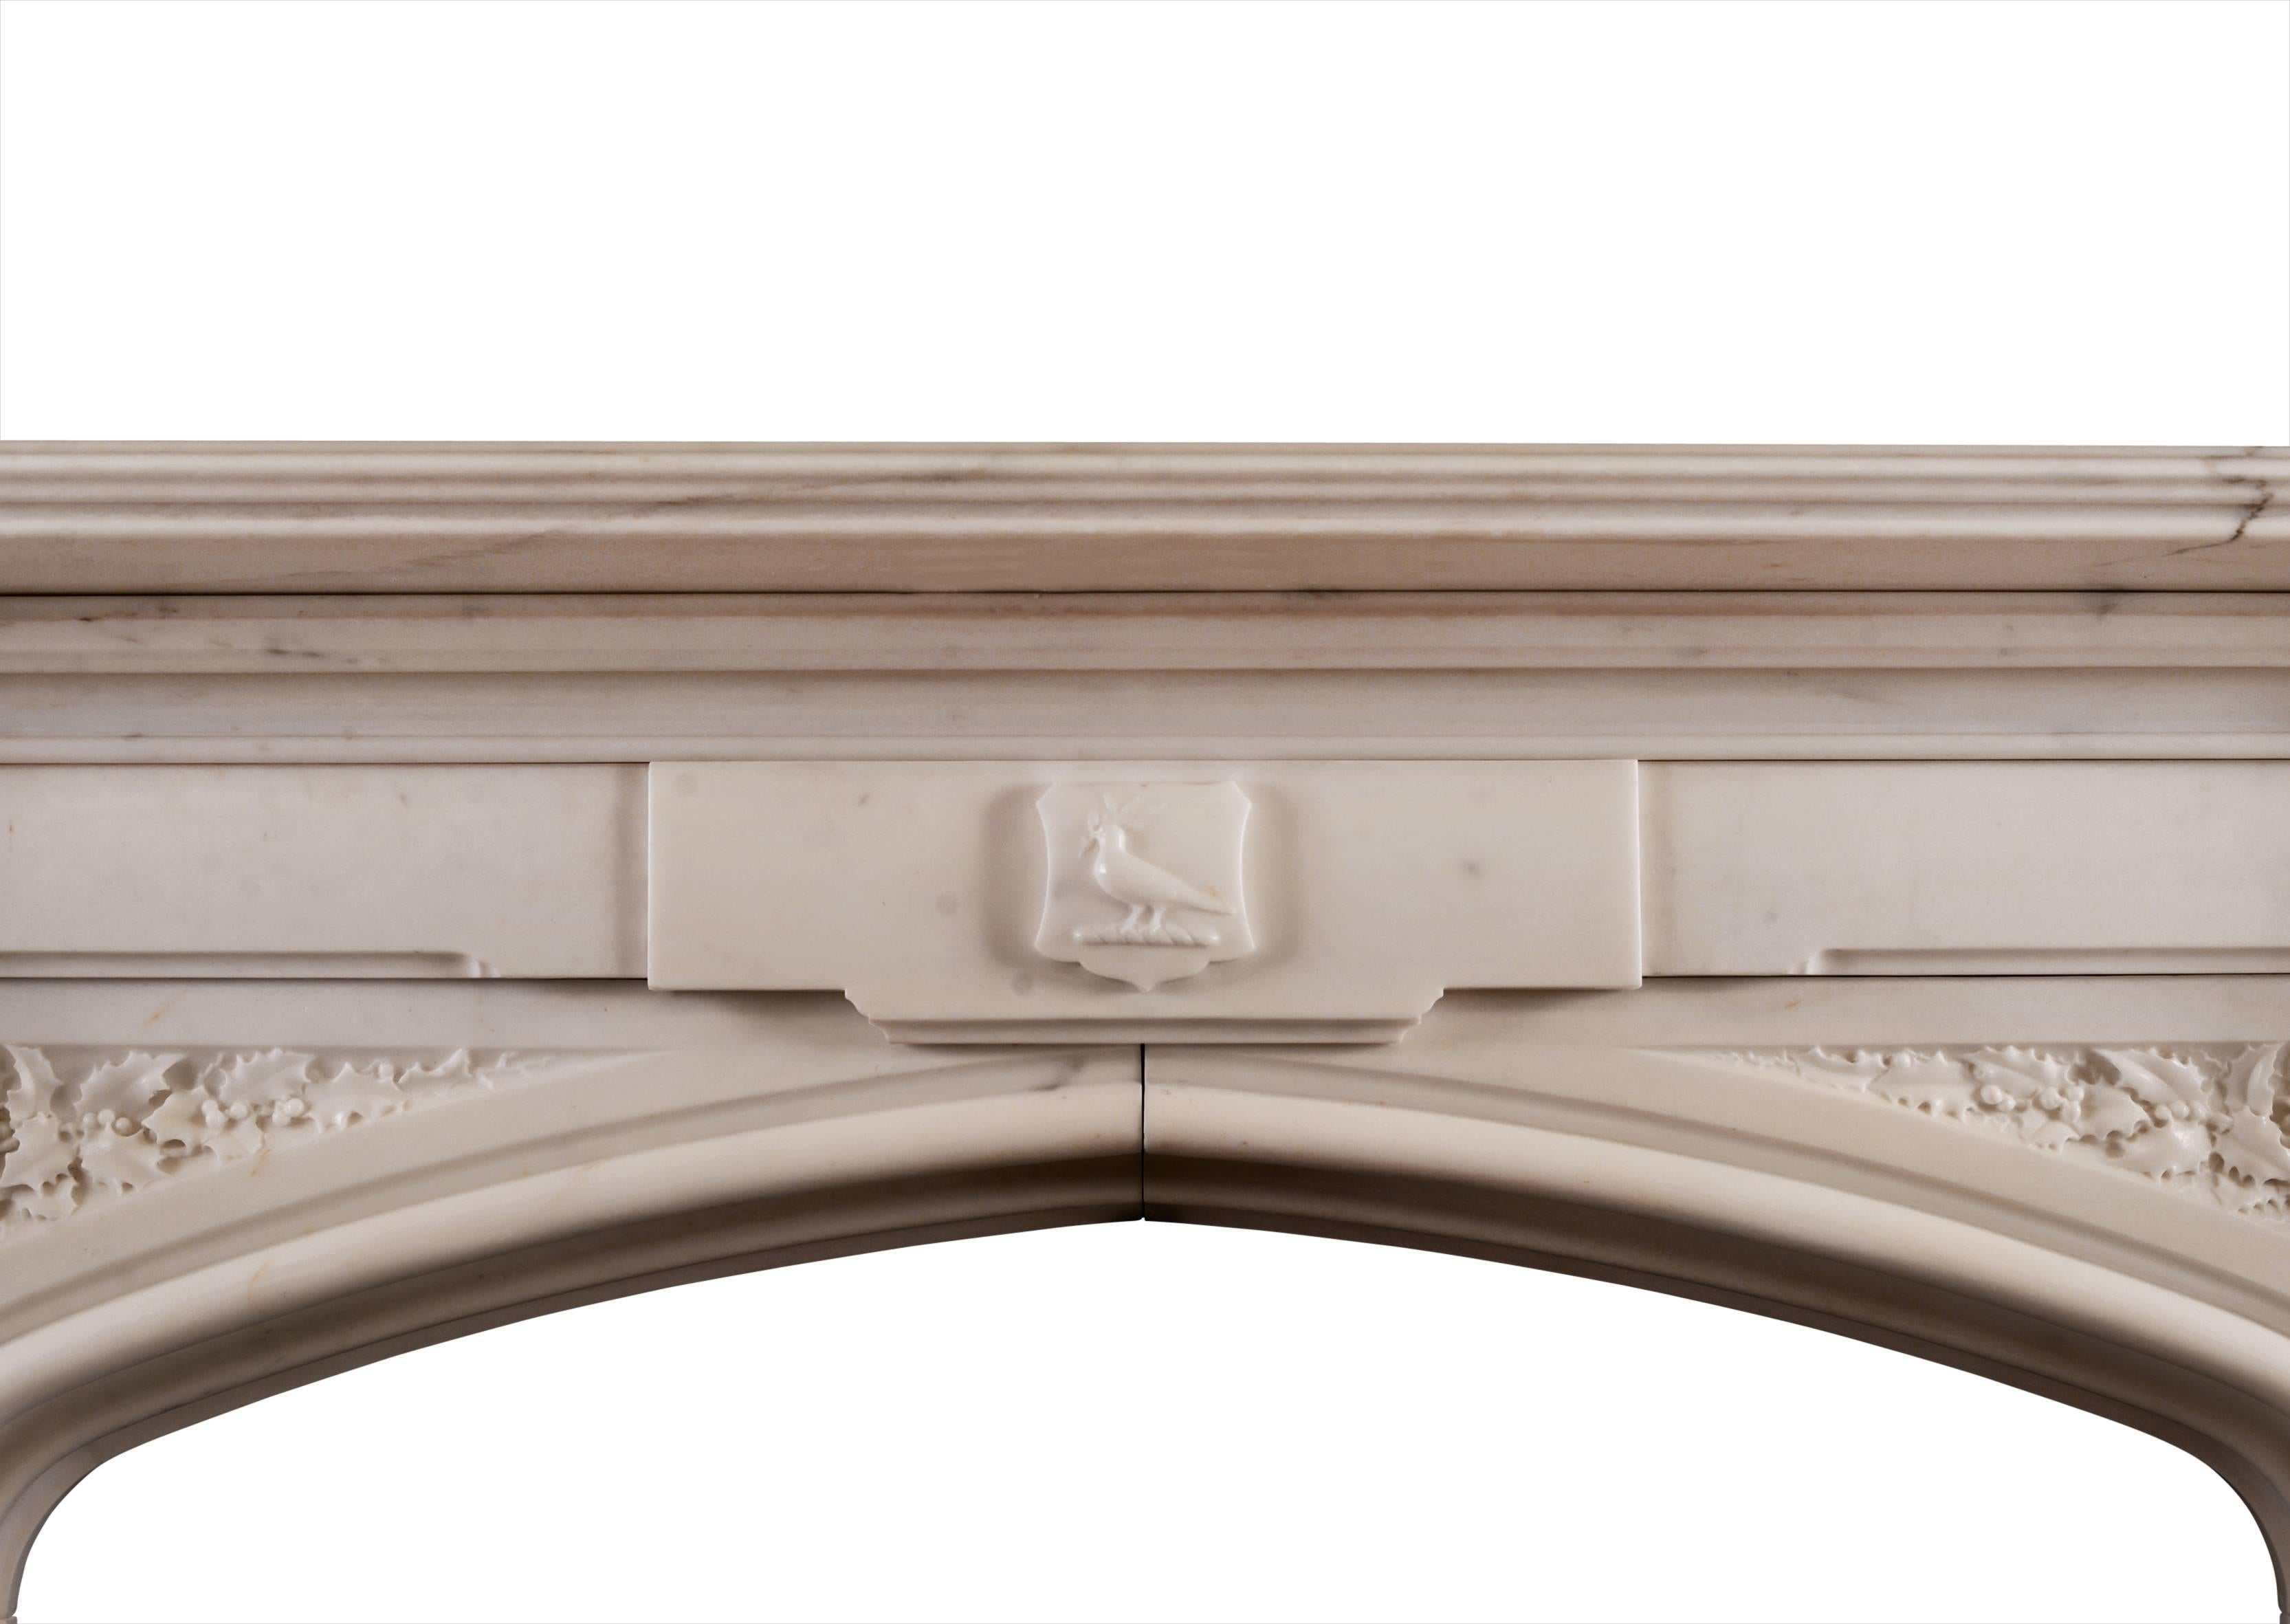 A fine quality Gothic Revival fireplace carved in statuary marble. The spandrels with finely carved holly and berries. Octagonal suspended capitals under moulded shelf. The centre with small carved dove holding an olive branch. Very good quality